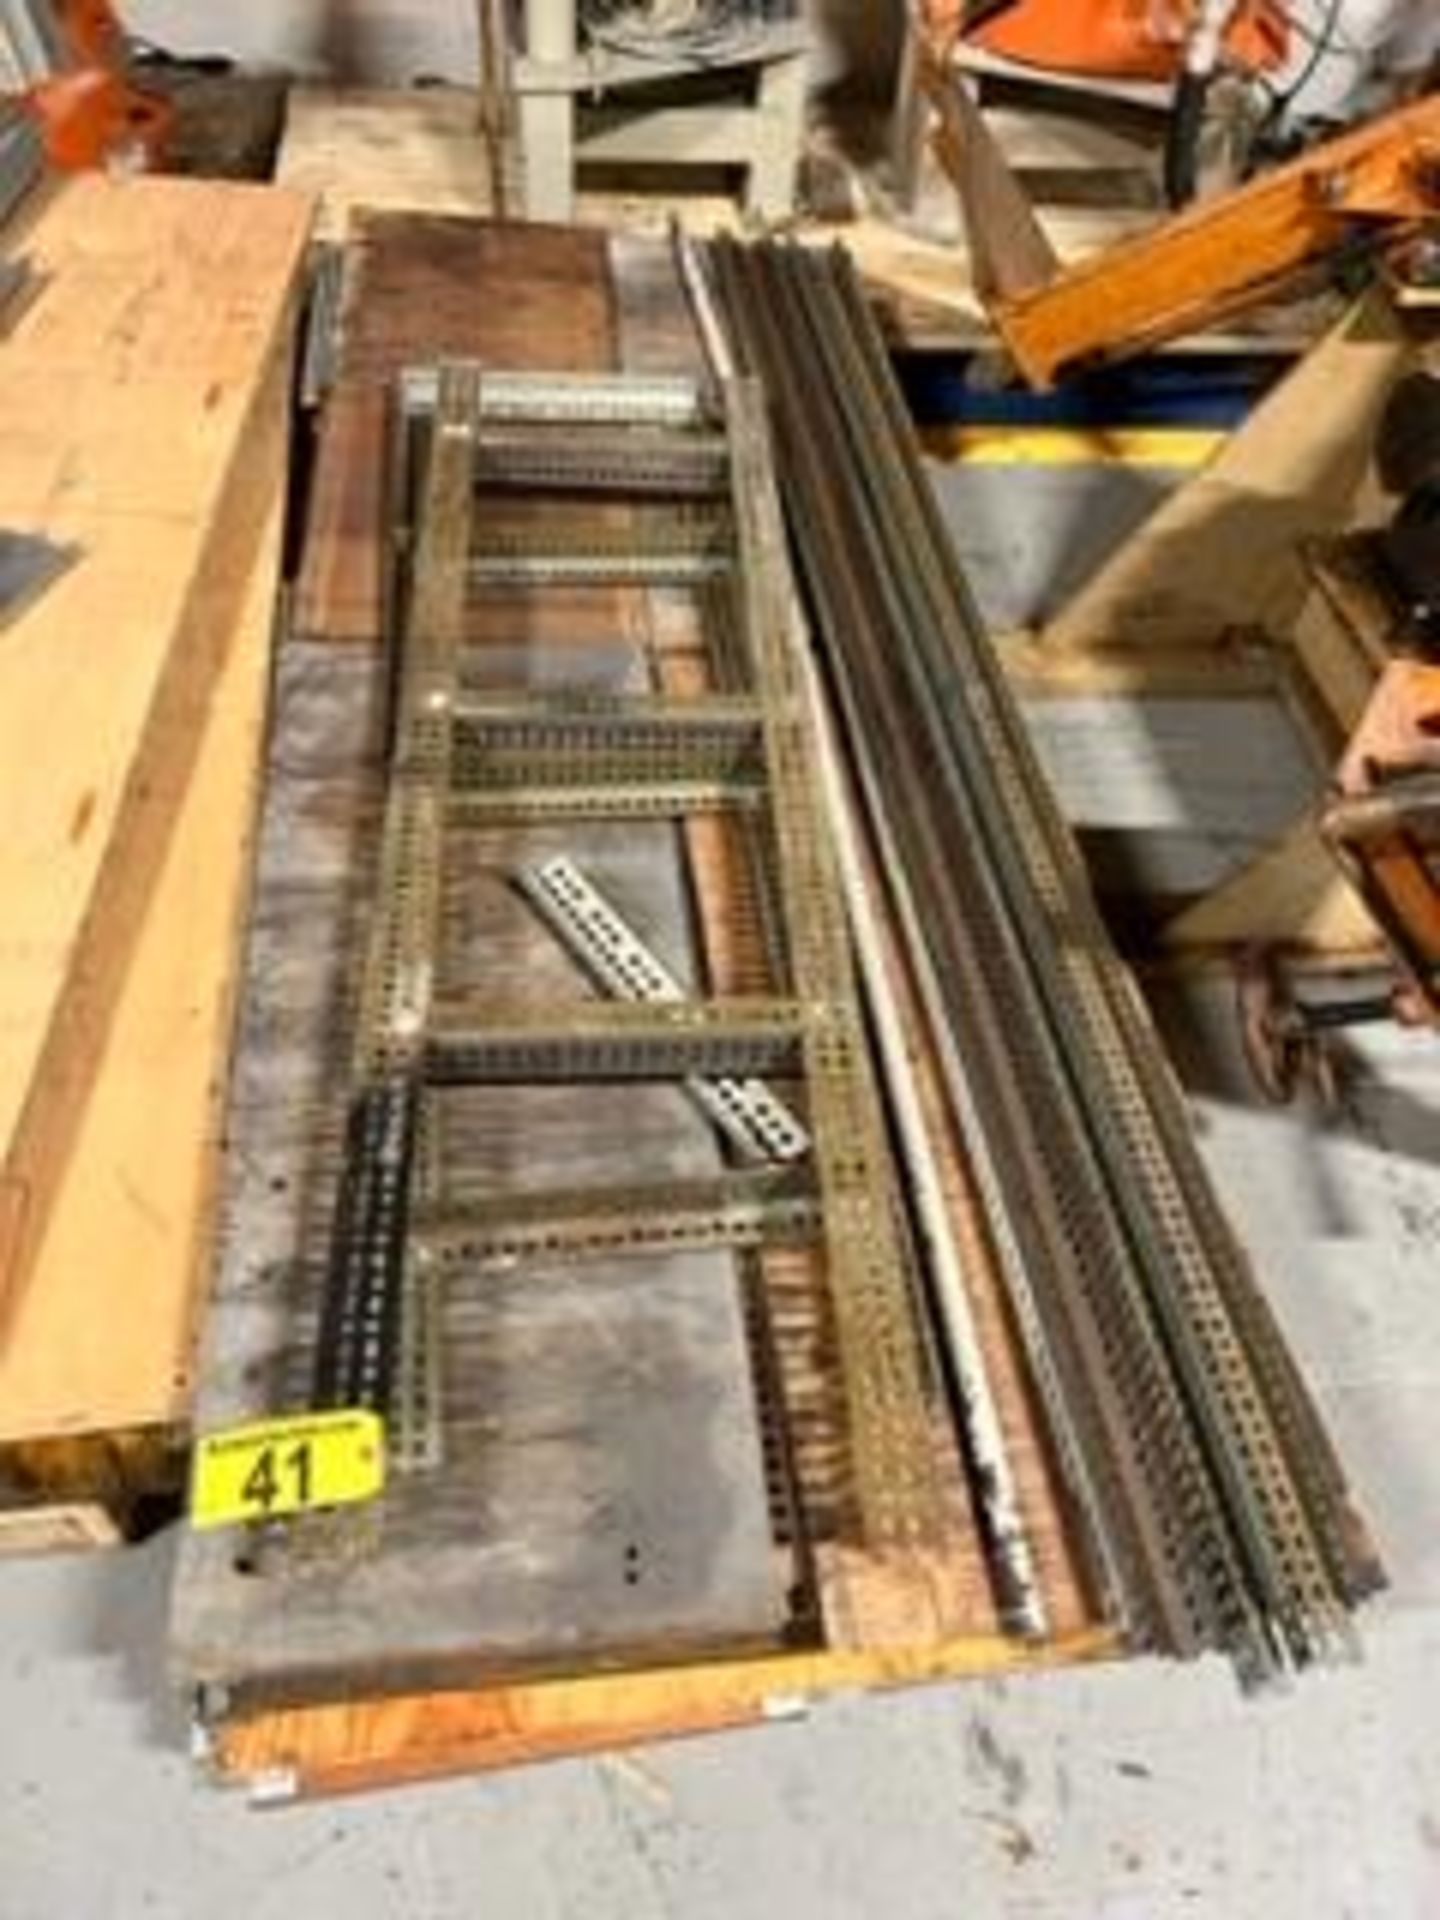 LOT: LIFTS OF 4X8 PLYWOOD, STEEL SHELVING